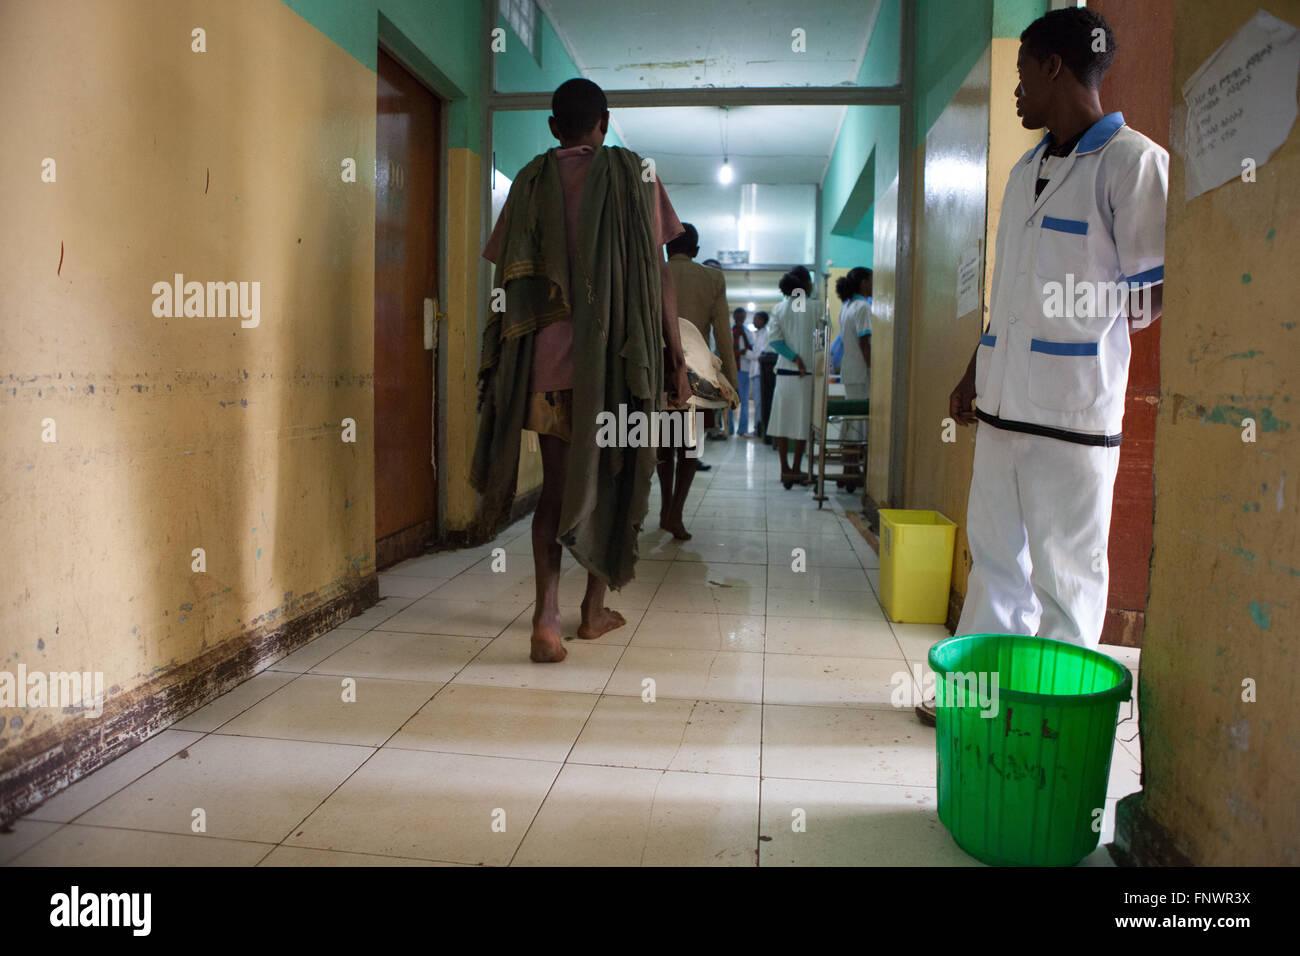 A patient is carried on a stretcher through a hospital corridor, Ethiopia, Africa. Stock Photo